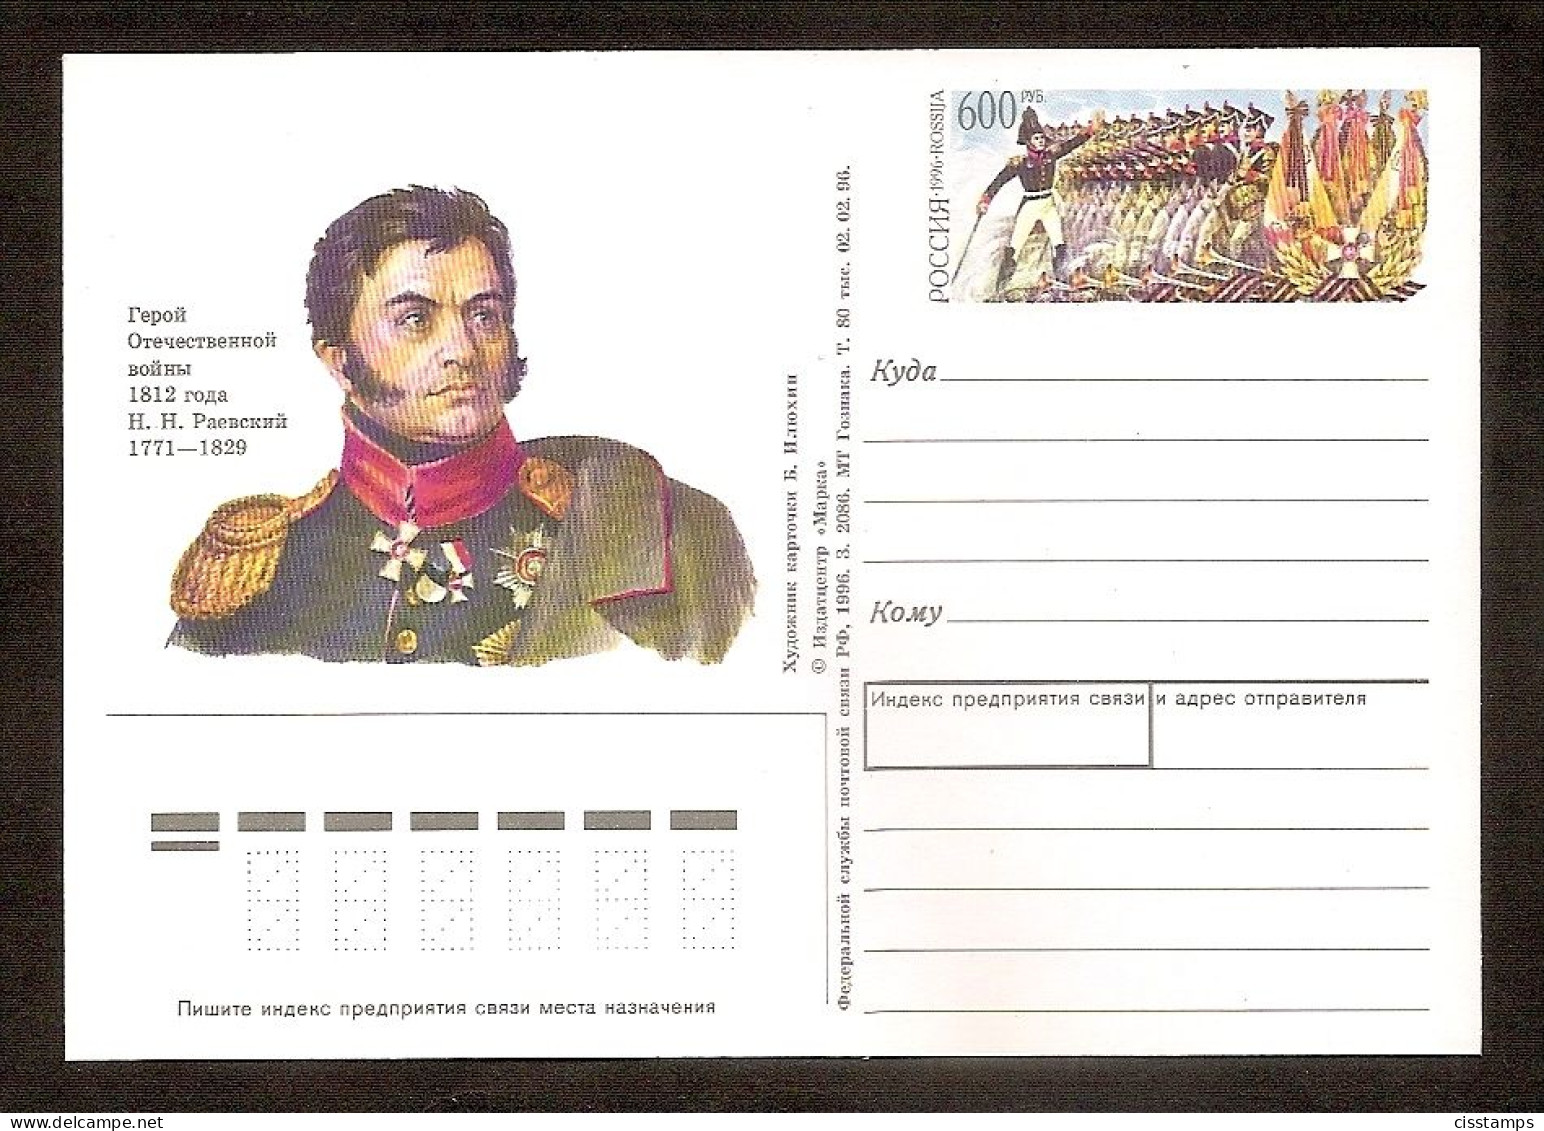 Russia 1996●Hero Of The 1812 War N.Raevsky●Symbols Of Russia●stamped Stationery●postal Card●Mi PSo49 - Entiers Postaux